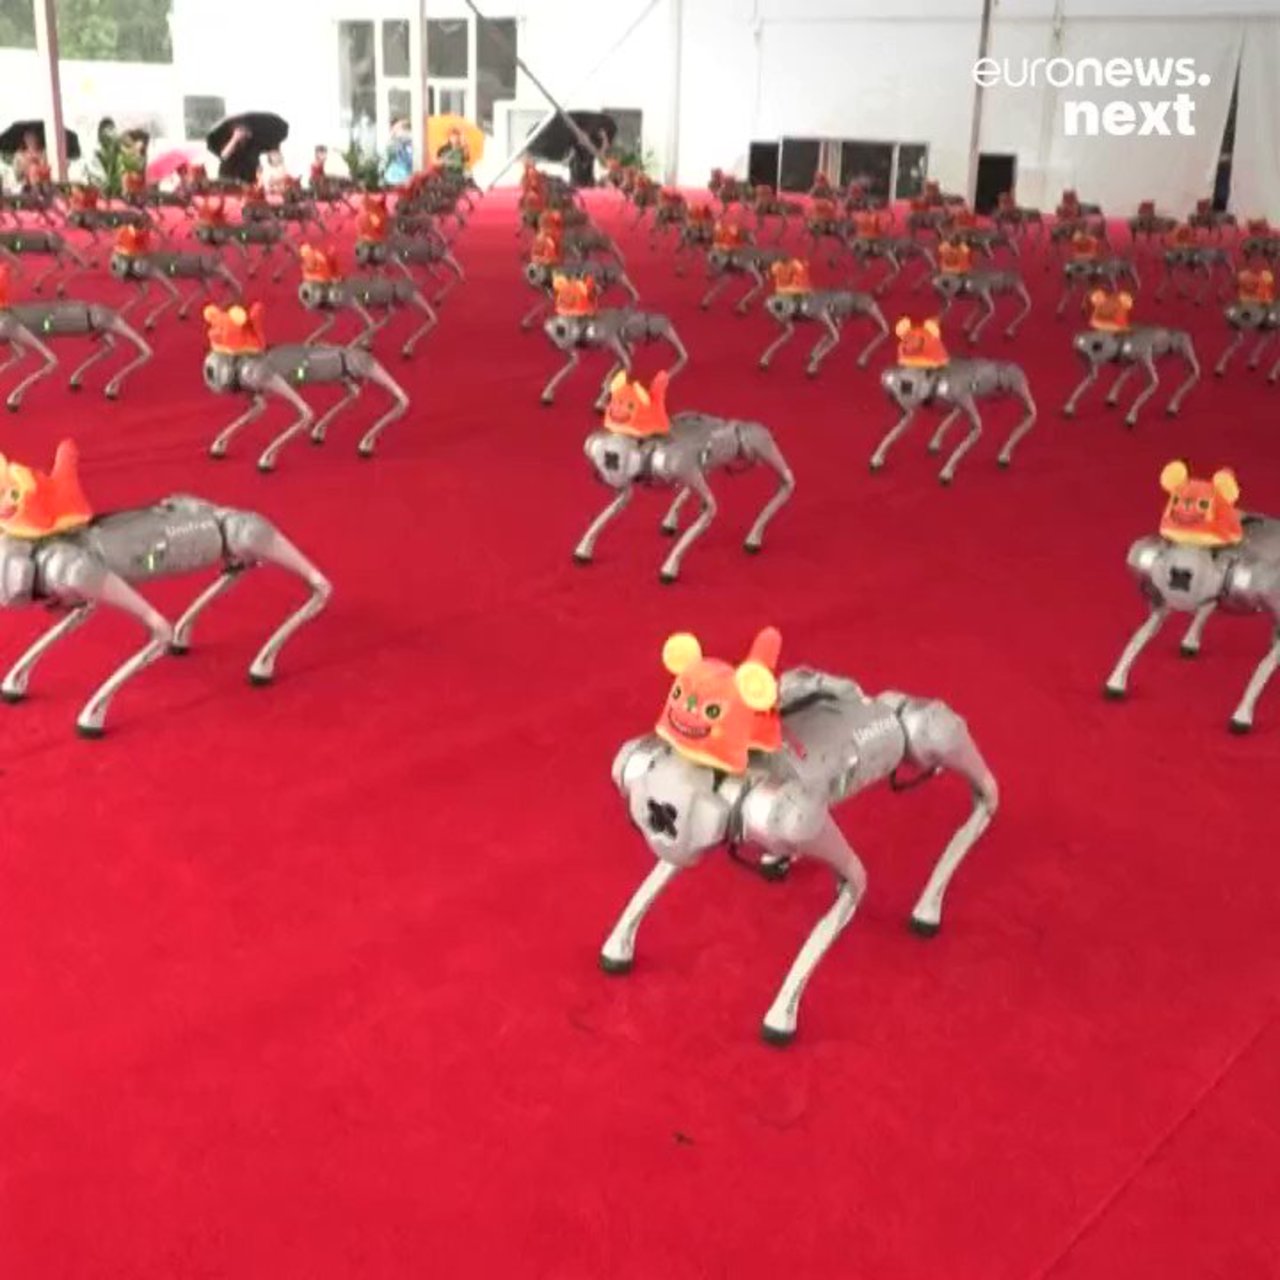 Highlights of the annual World #Robot Conference in Beijing by @euronewsnext #AI #ArtificialIntelligence #MI #Robotics #Engineering #Innovation #FutureOfWork #Tech #Technology cc: @terenceleungsf @wil_bielert @ronald_vanloon https://t.co/NAmq950d9C